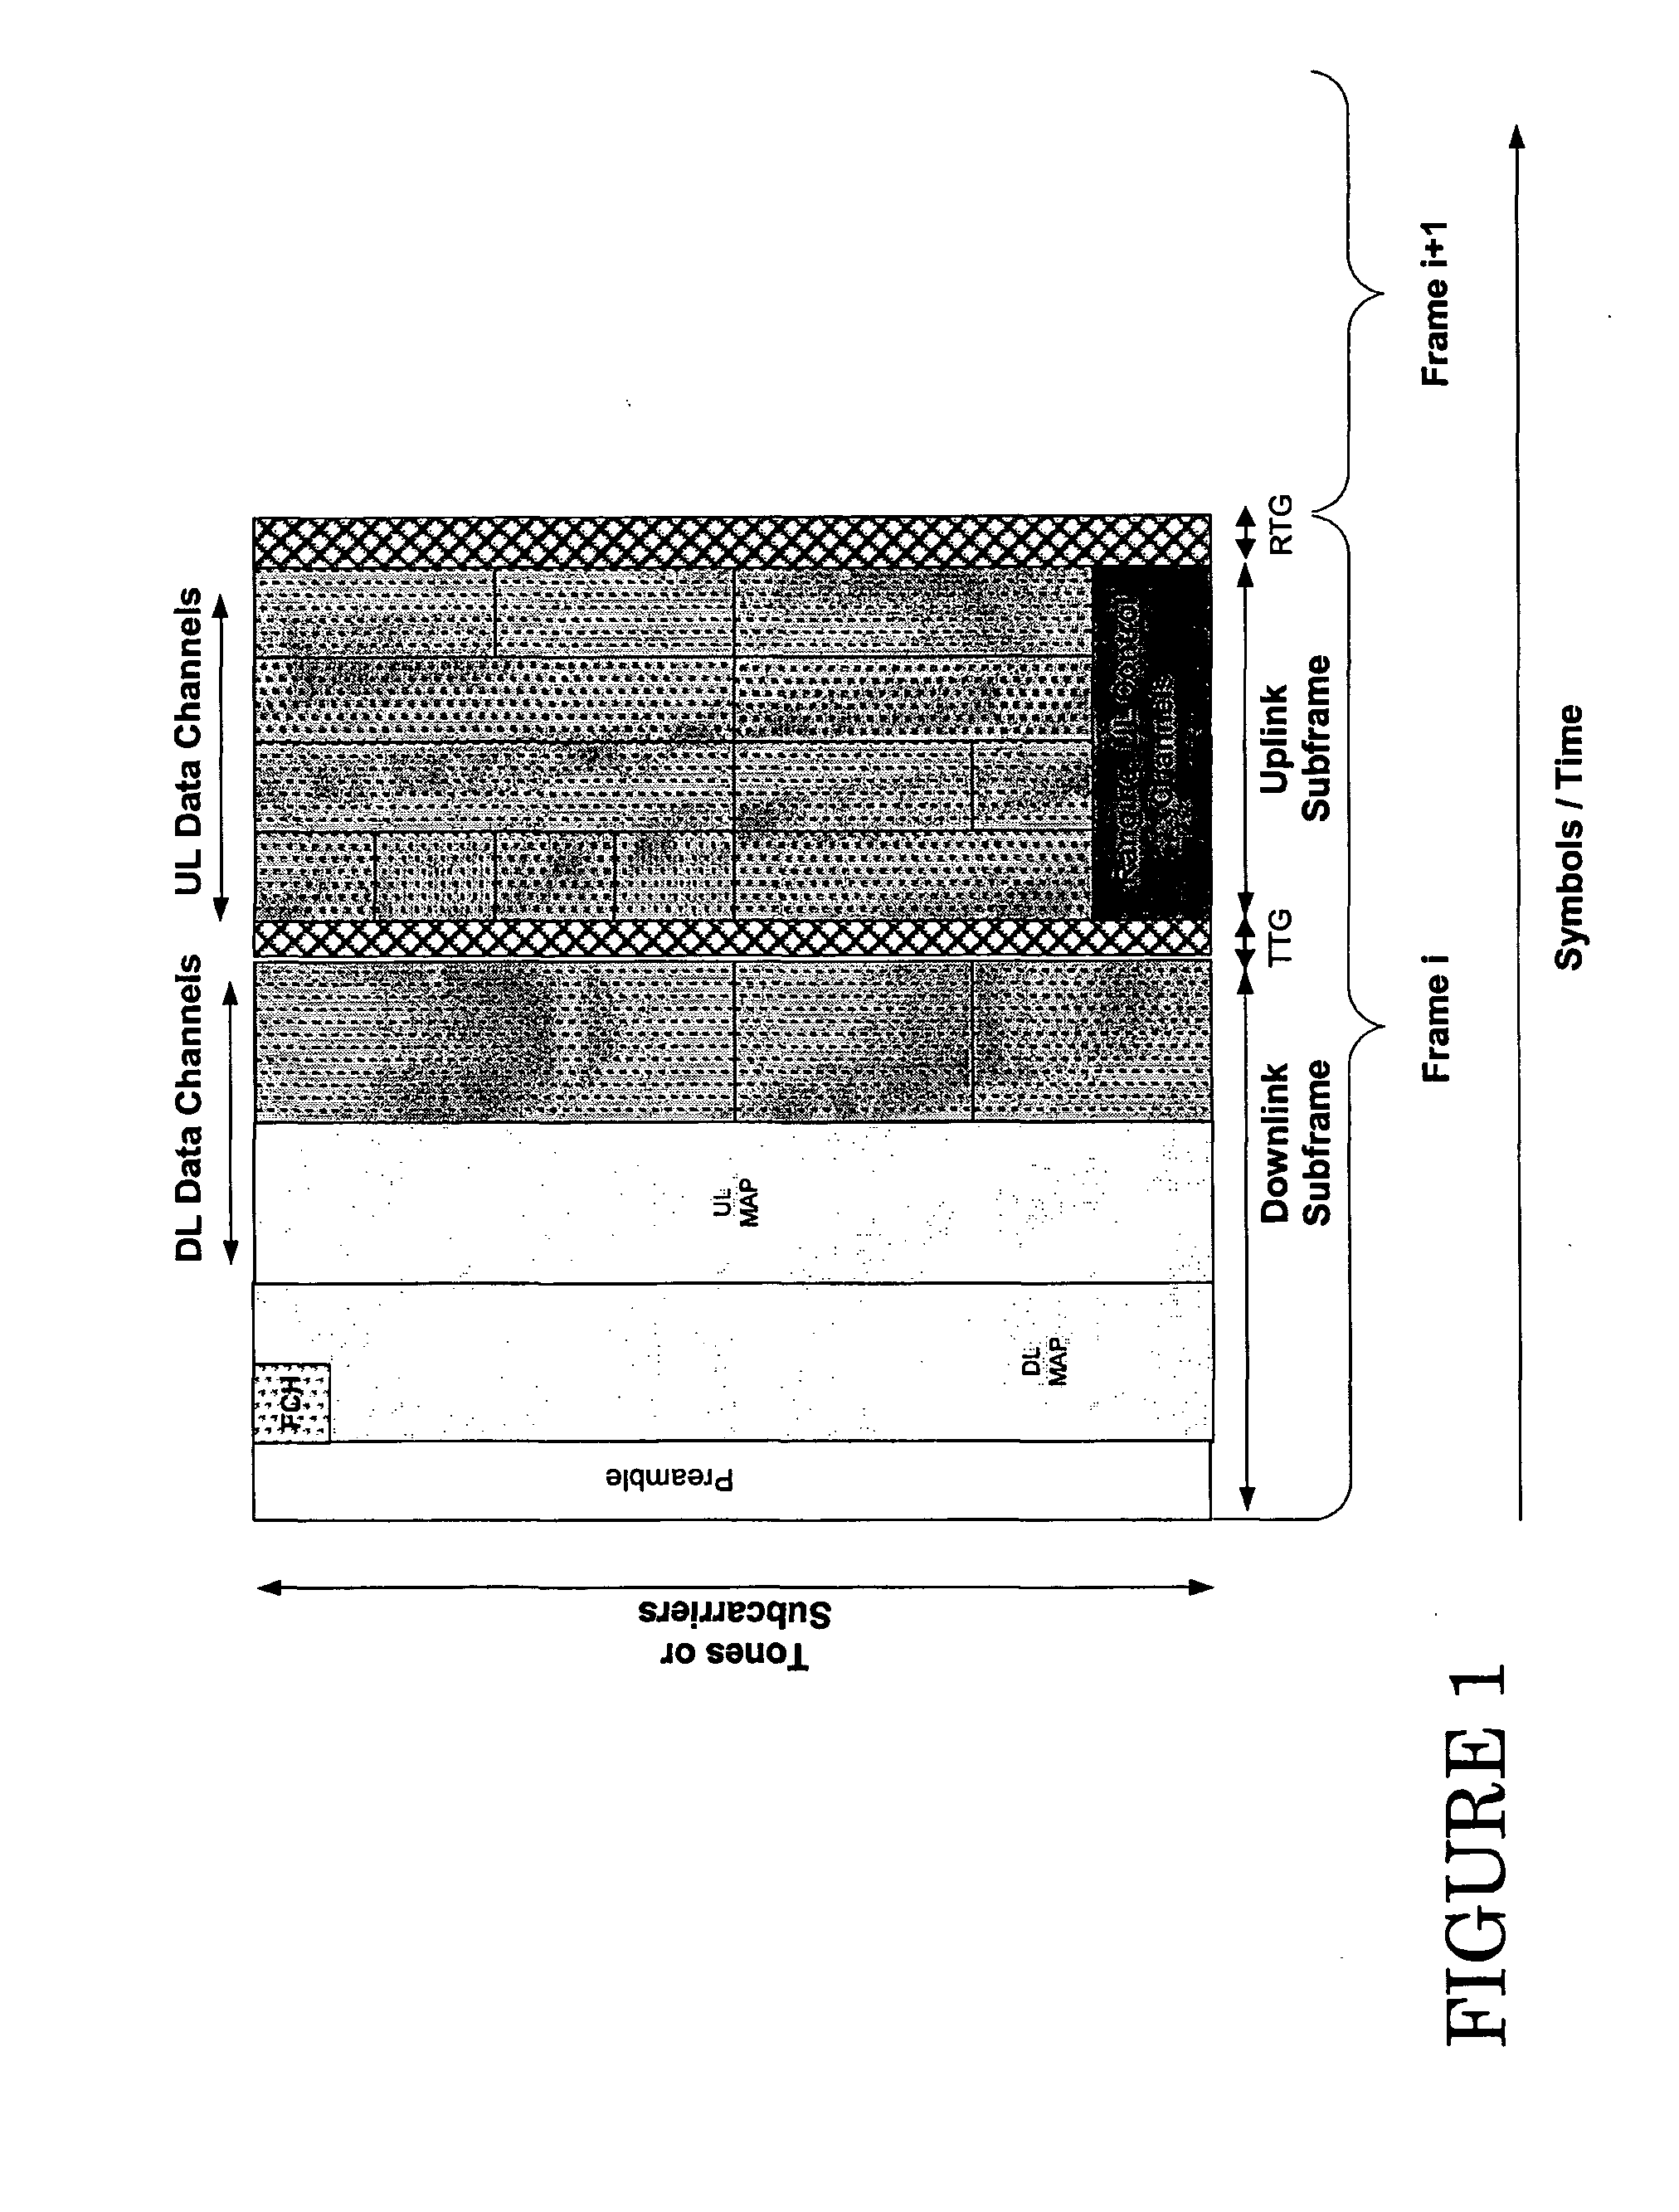 Method and apparatus for providing information to mobile stations in inactive states